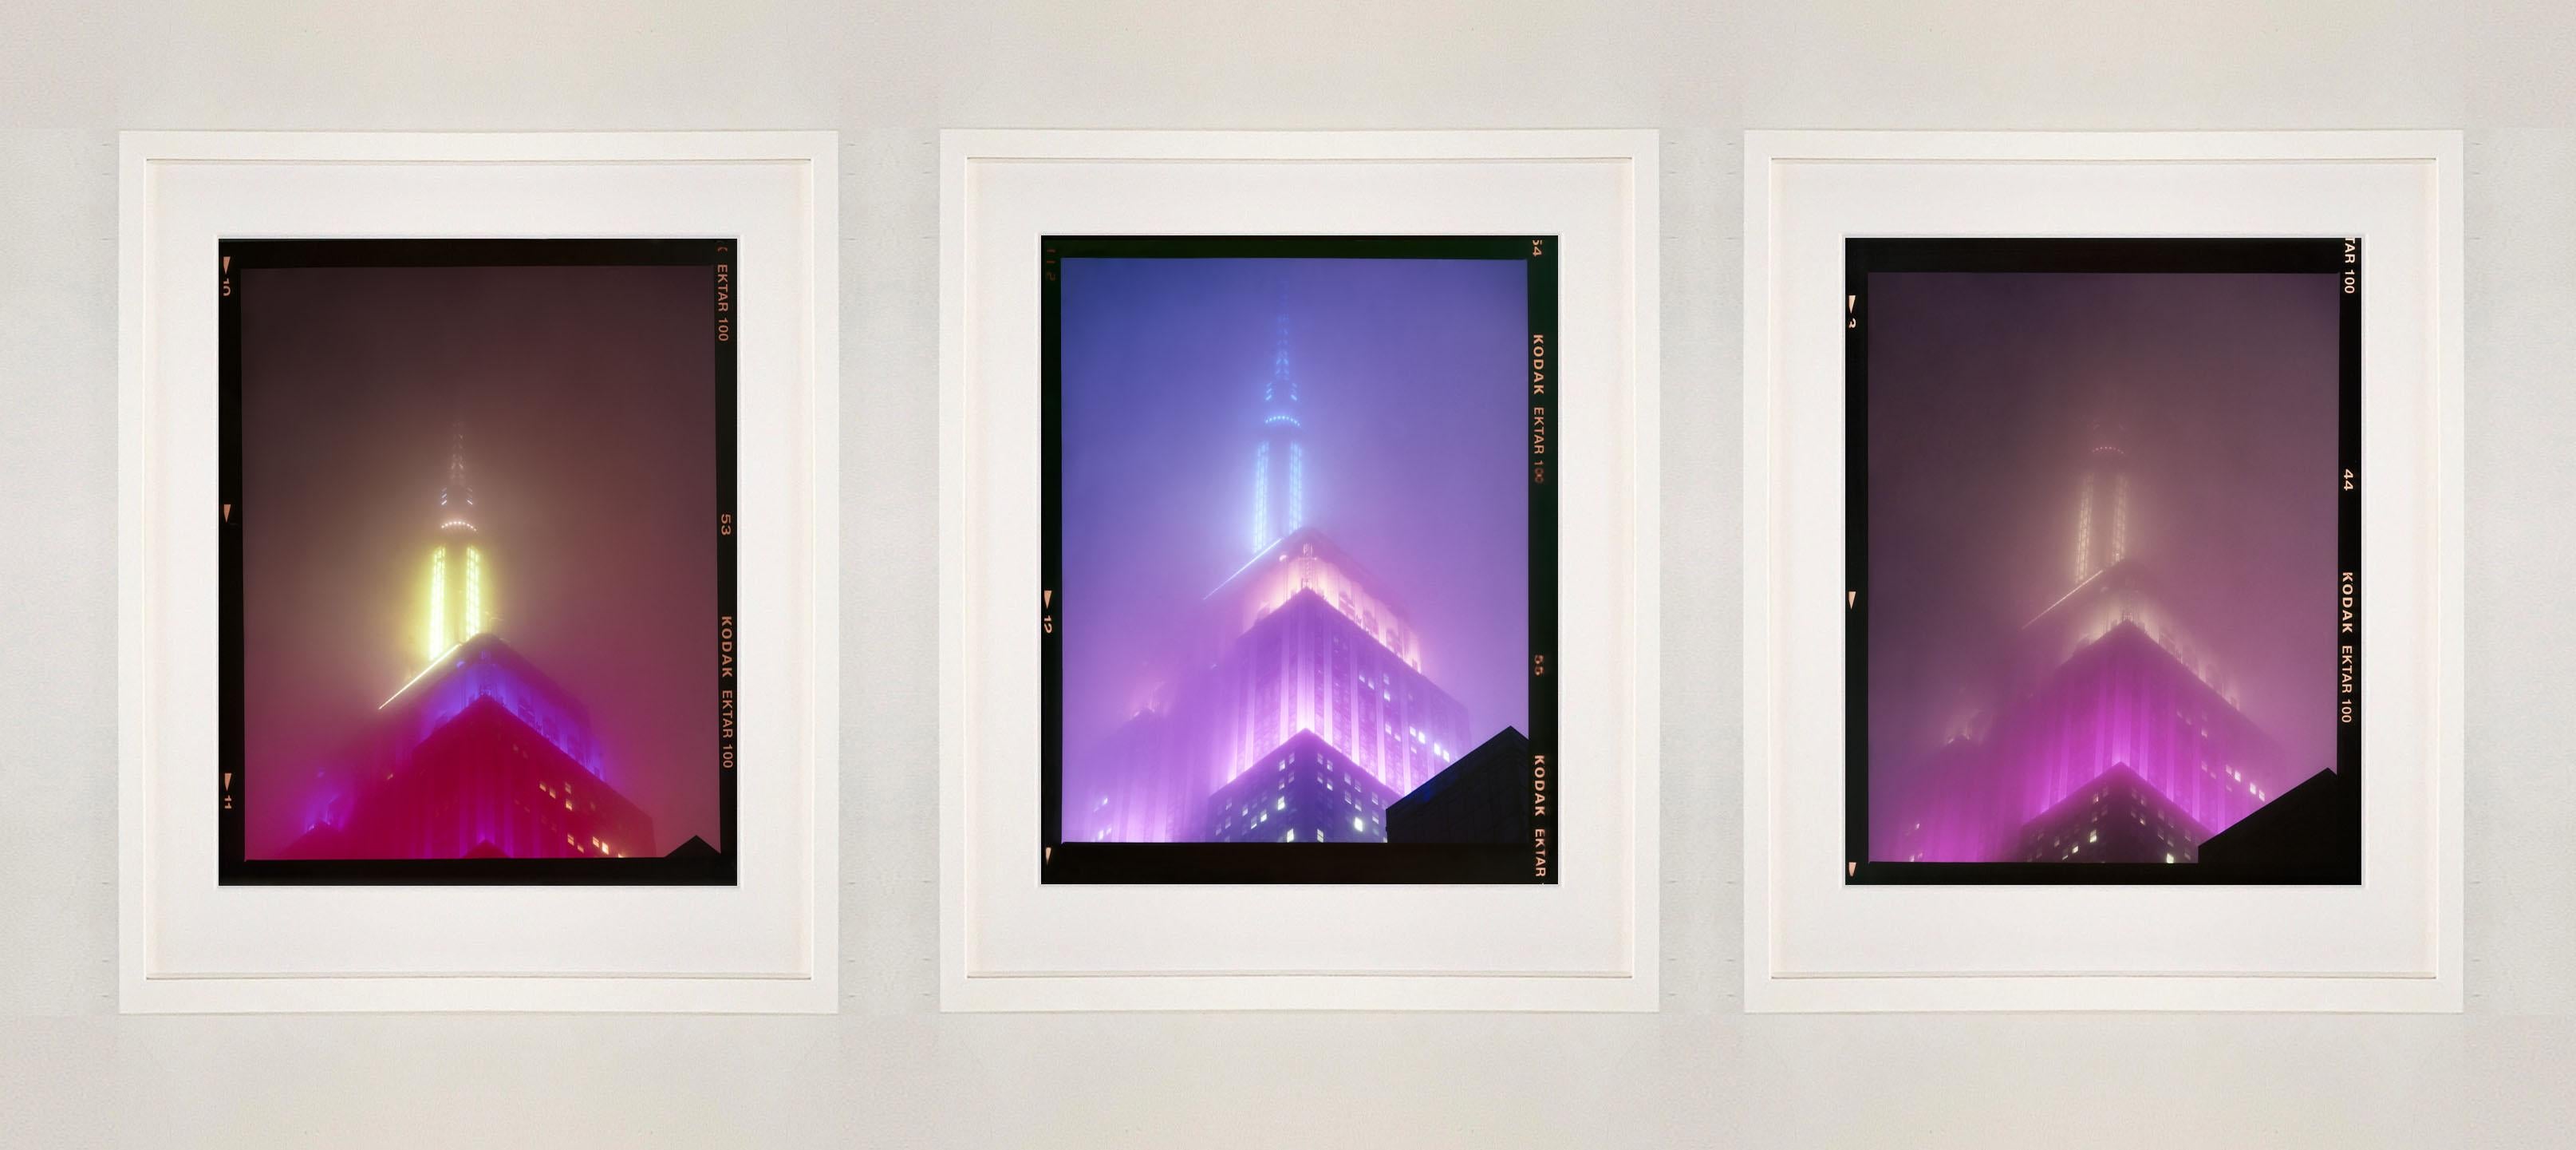 'NOMAD VIII (Film Rebate)', New York. Richard Heeps has photographed the iconic Empire State building in the mist. The NOMAD sequence of photographs capture the art deco architecture illuminated by changing colours, and is part of Richard's street